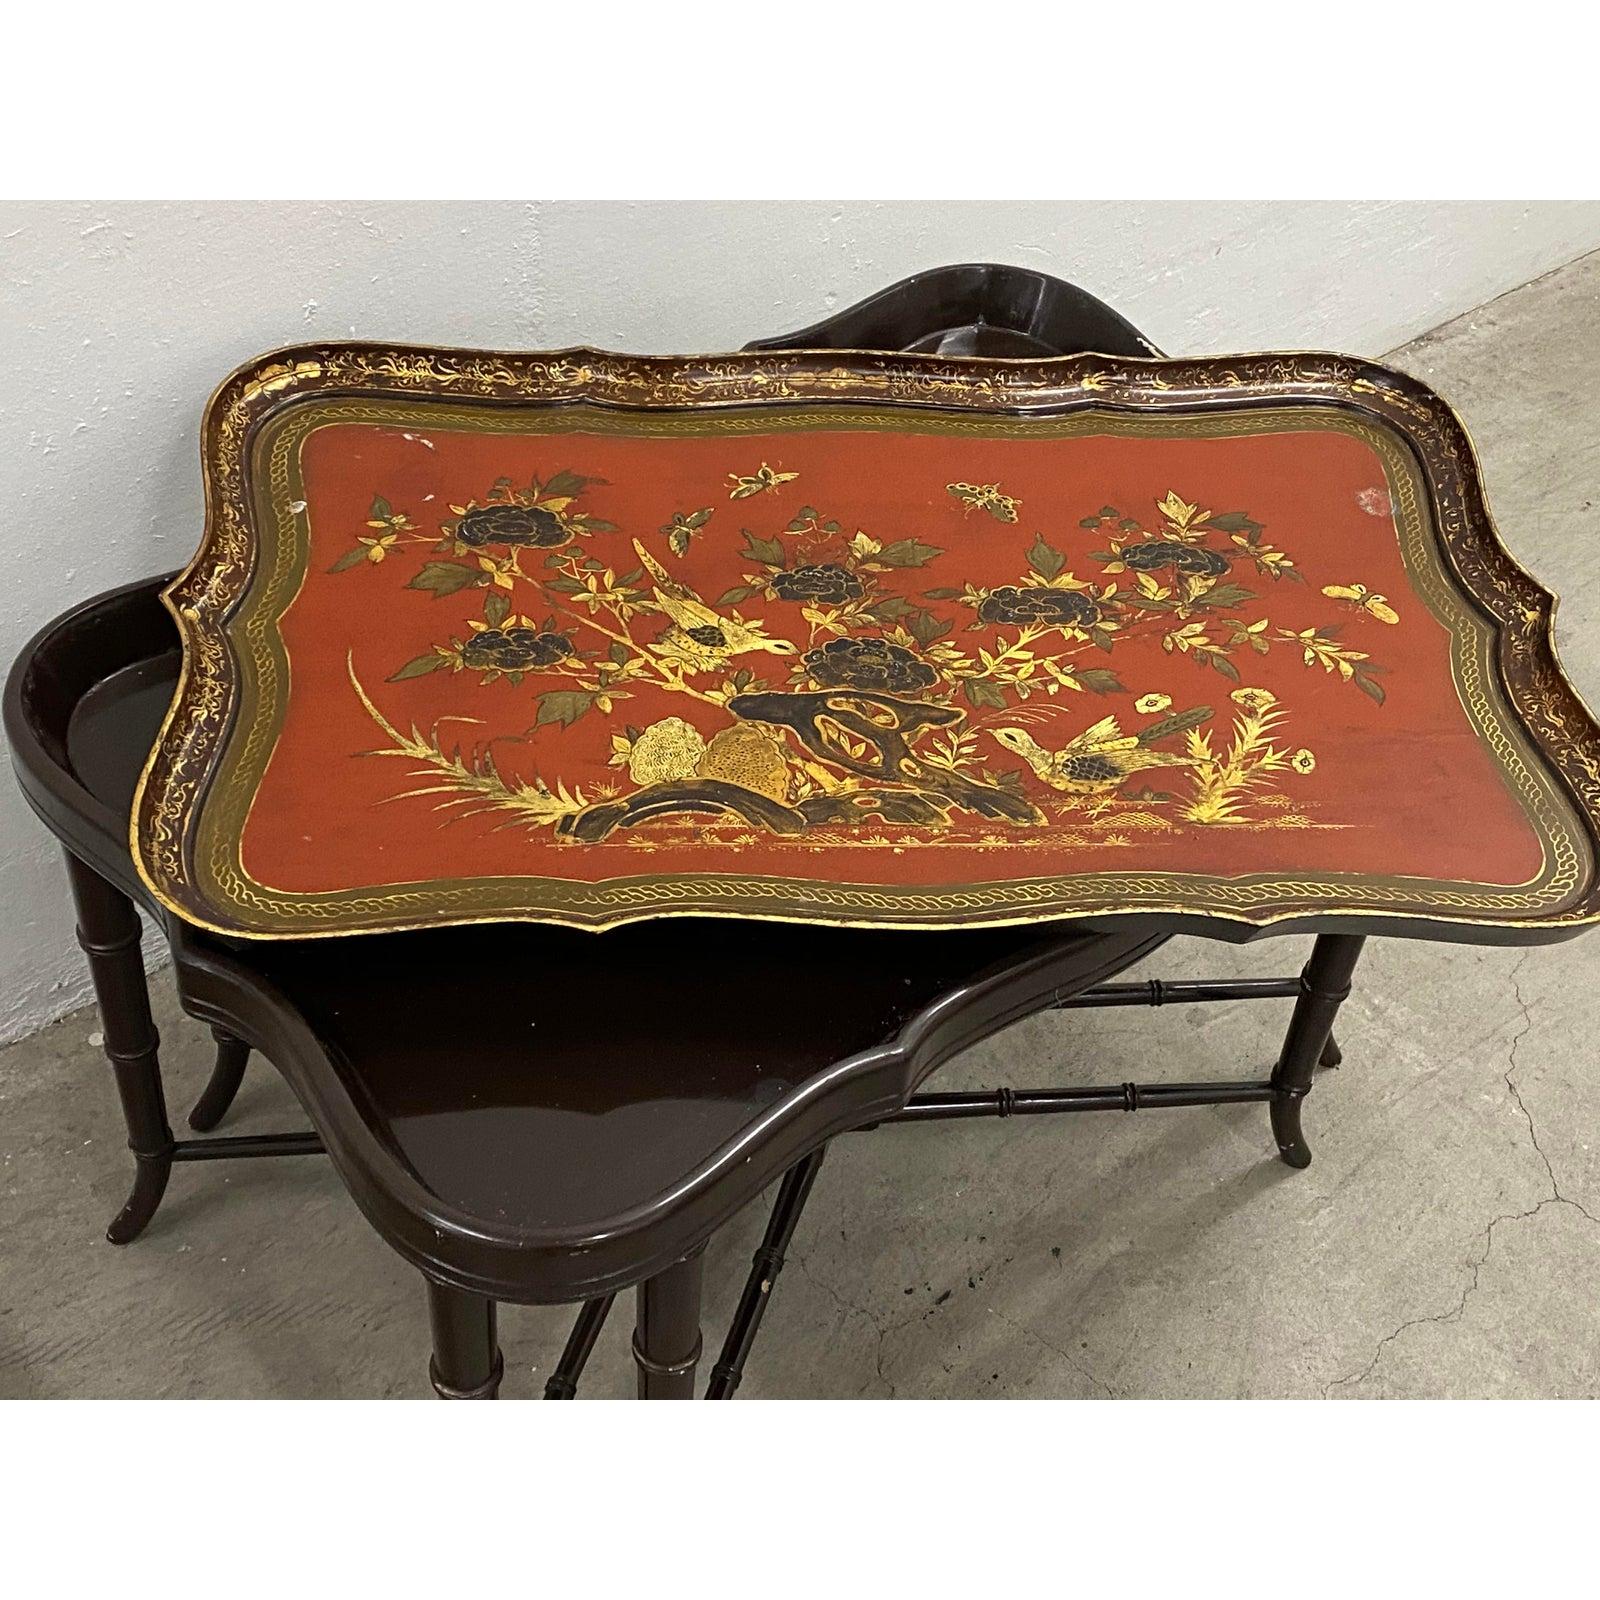 19th century papier mâché English chinoiserie tray table

Beautiful antique tray table with removable tray on a custom black lacquered Stand.

Dimensions 35